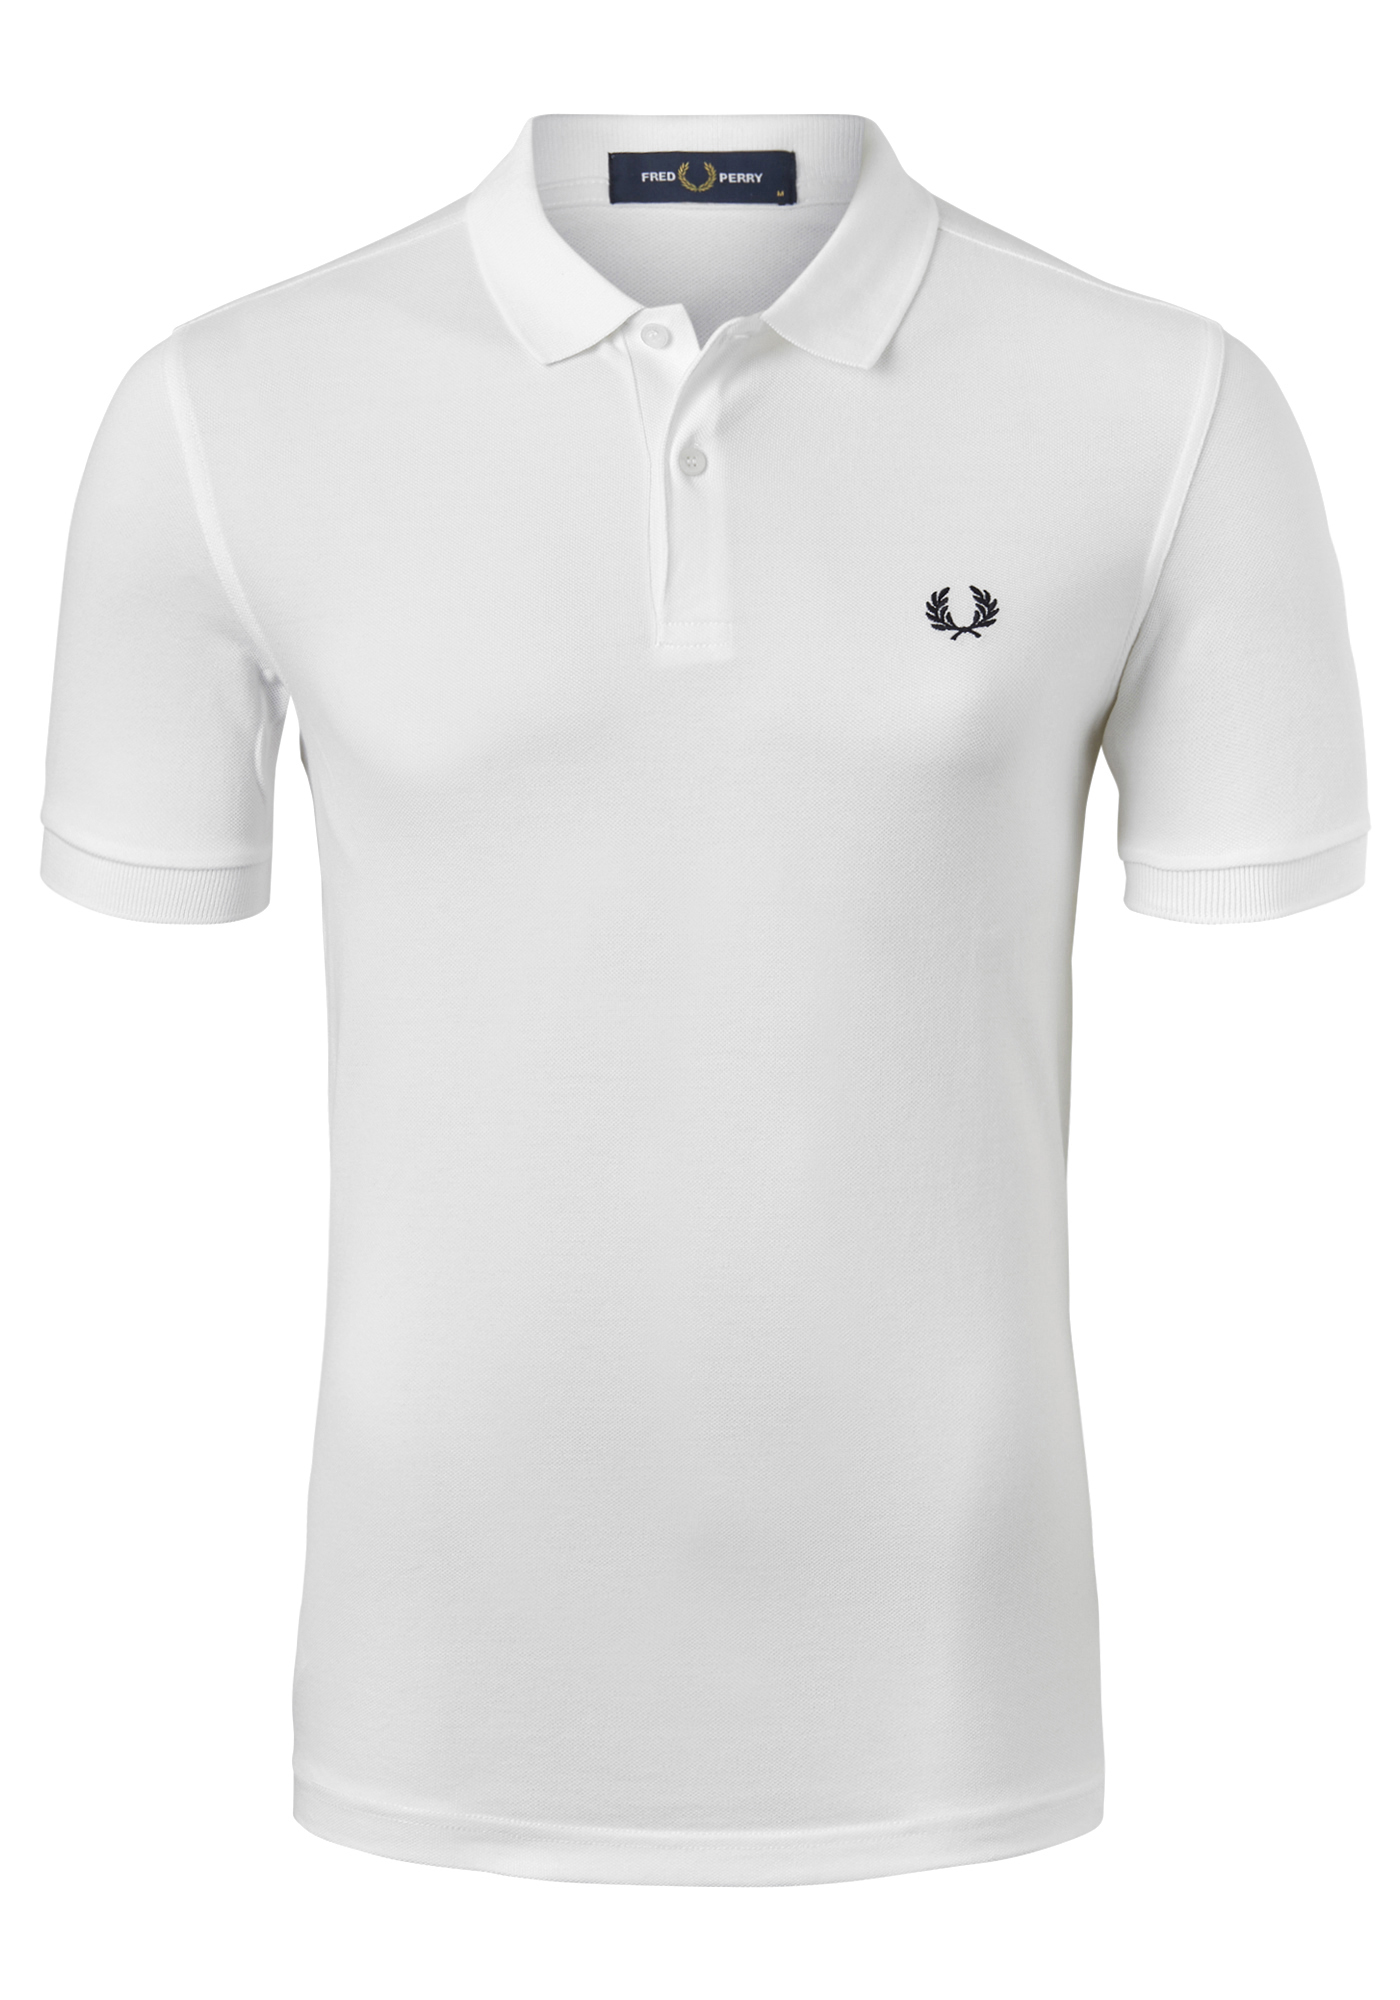 Fred Perry M6000 polo shirt, heren polo white, wit - NIEUWE COLLECTIE